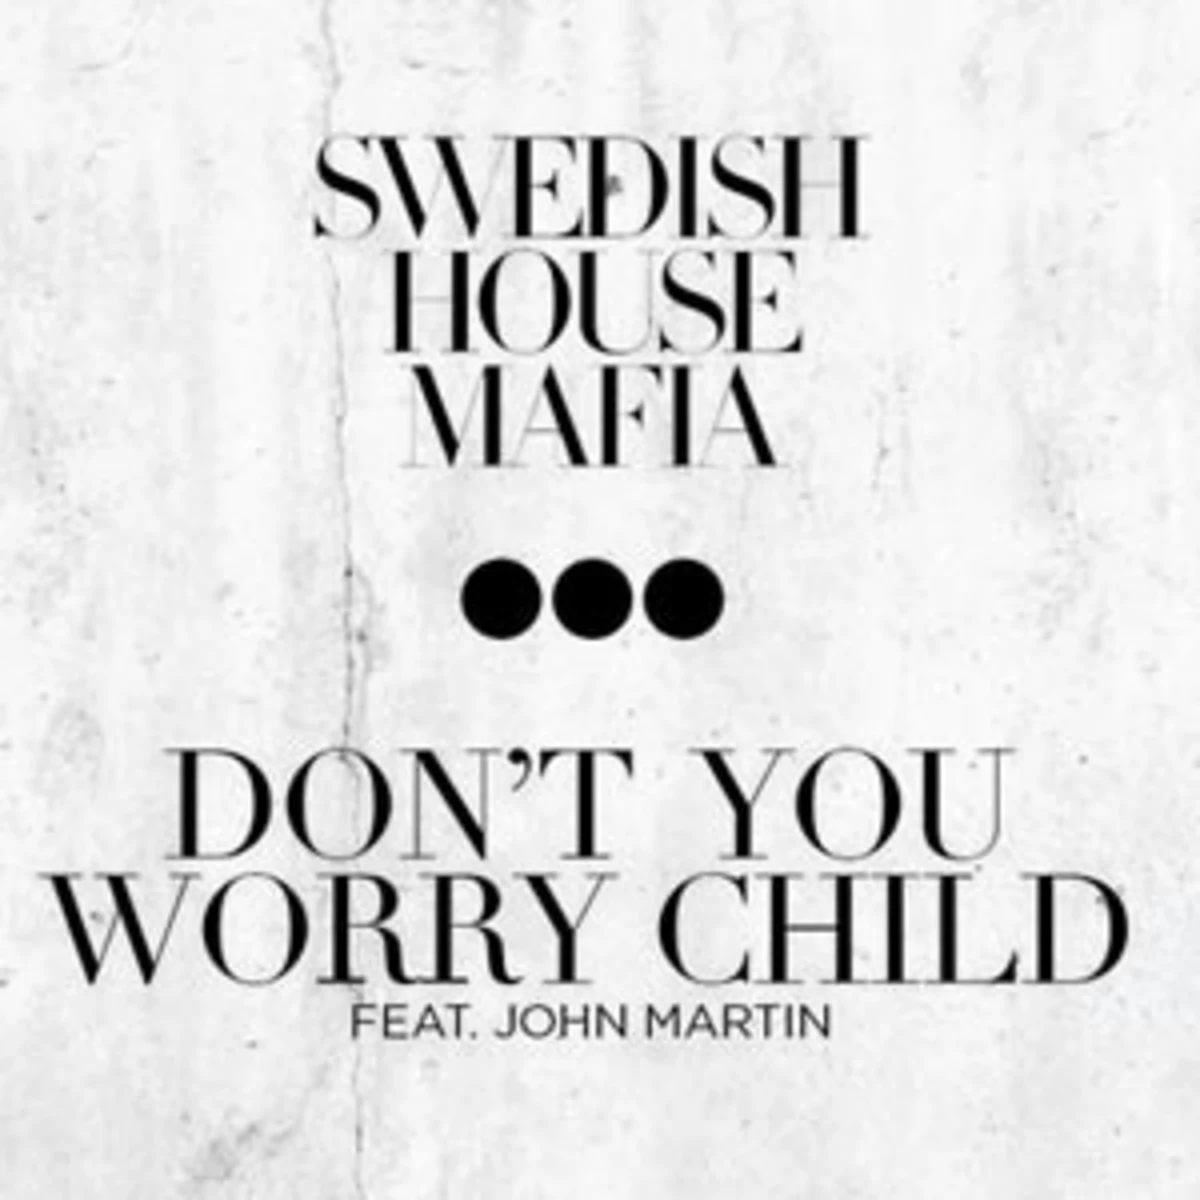 New don t you worry. Swedish House Mafia don't you worry child. Swedish House Mafia ft. John Martin don't you worry child (Remixes). Swedish House Mafia. Swedish House Mafia - don't you worry child (Acoustic Version).